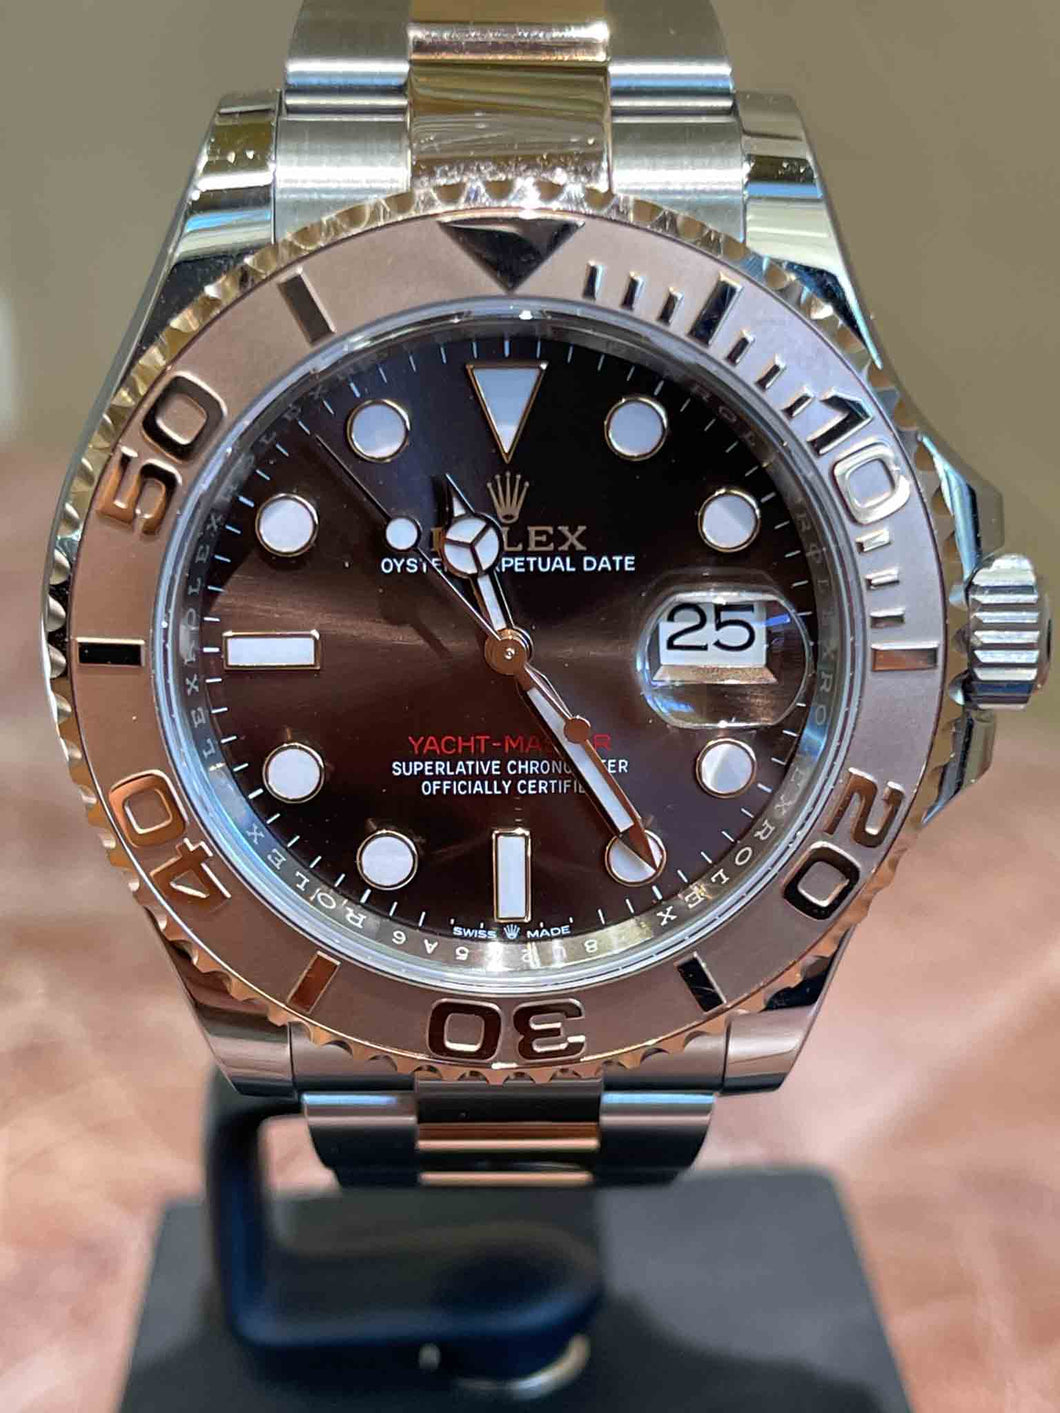 Rolex Yacht-Master 116621 Two Tone Rose Gold With Chocolate Dial